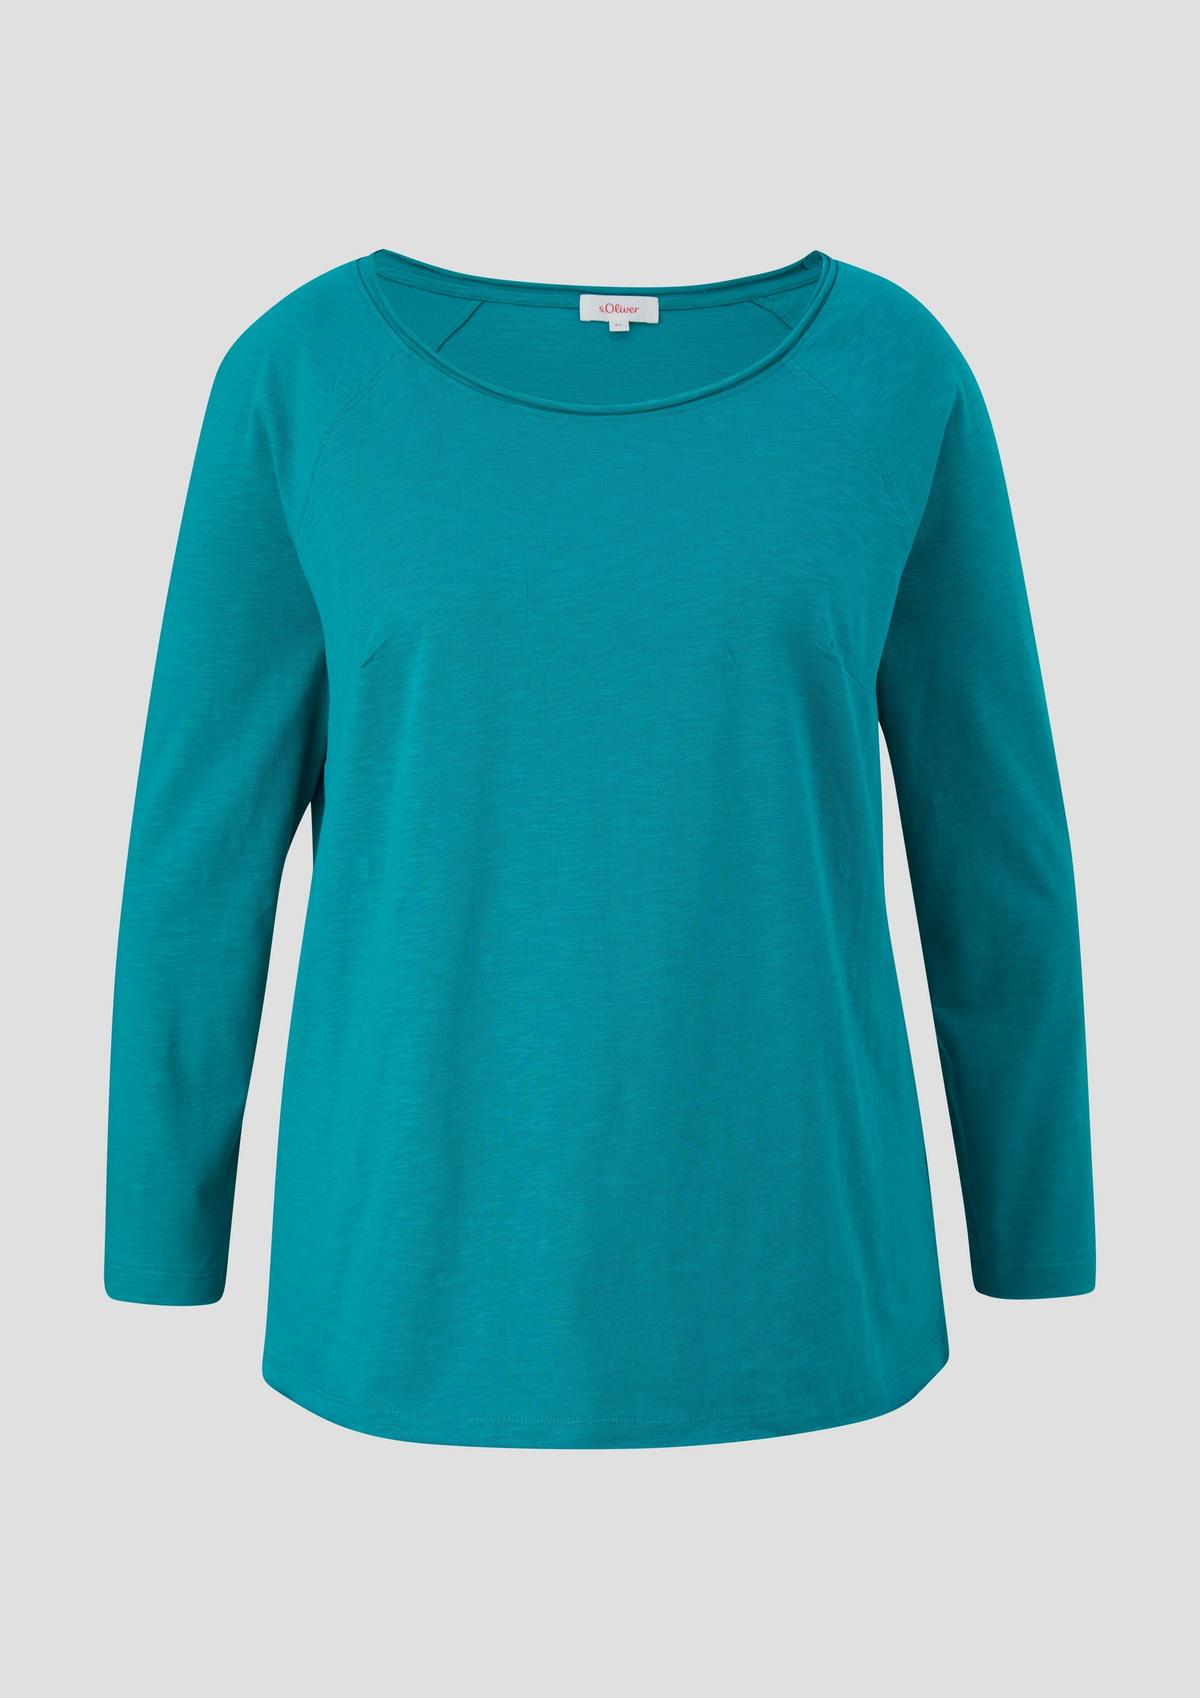 s.Oliver Long sleeve top with a slub texture